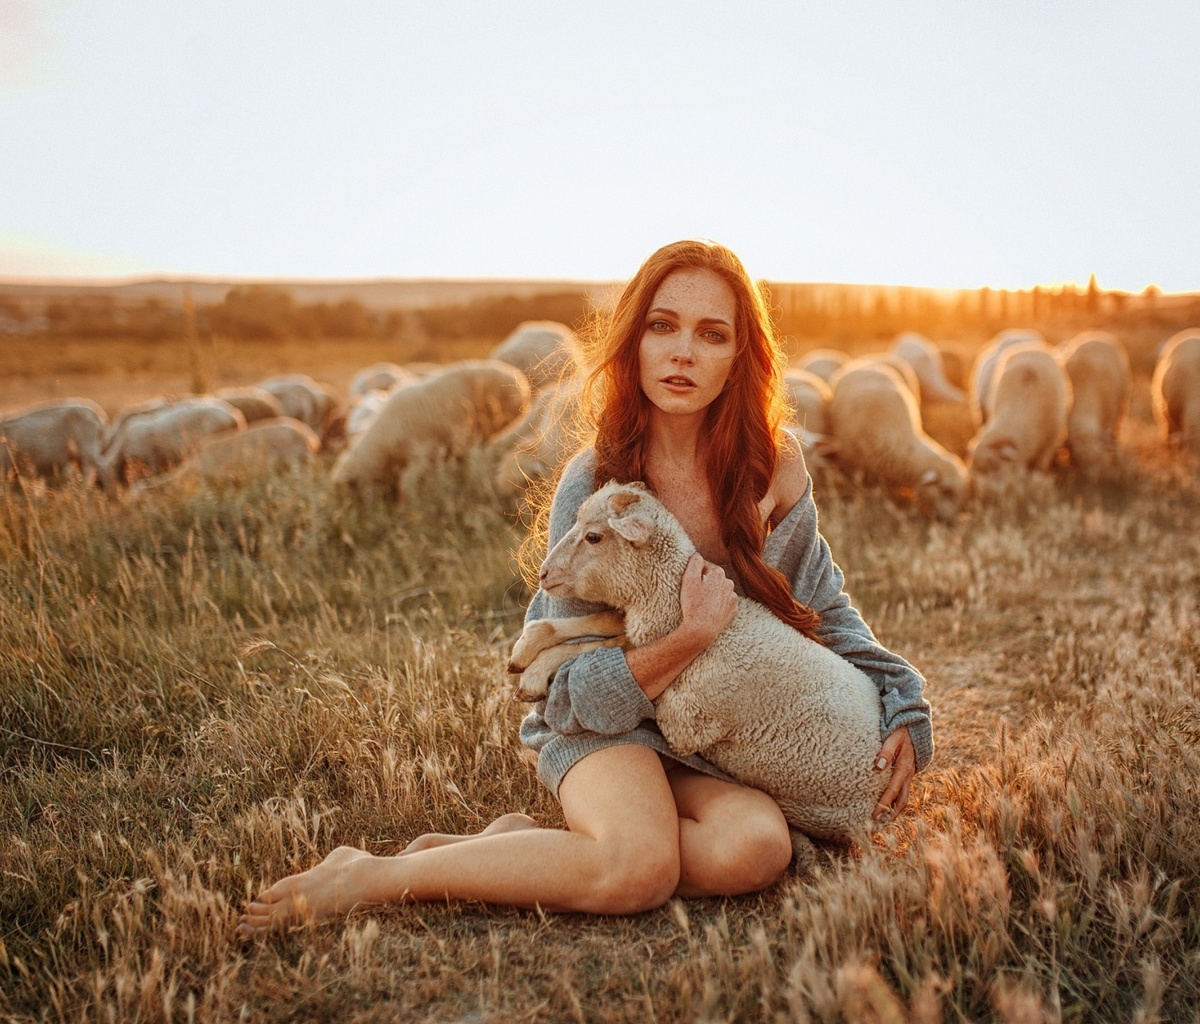 Girl with Sheep wallpaper 1200x1024